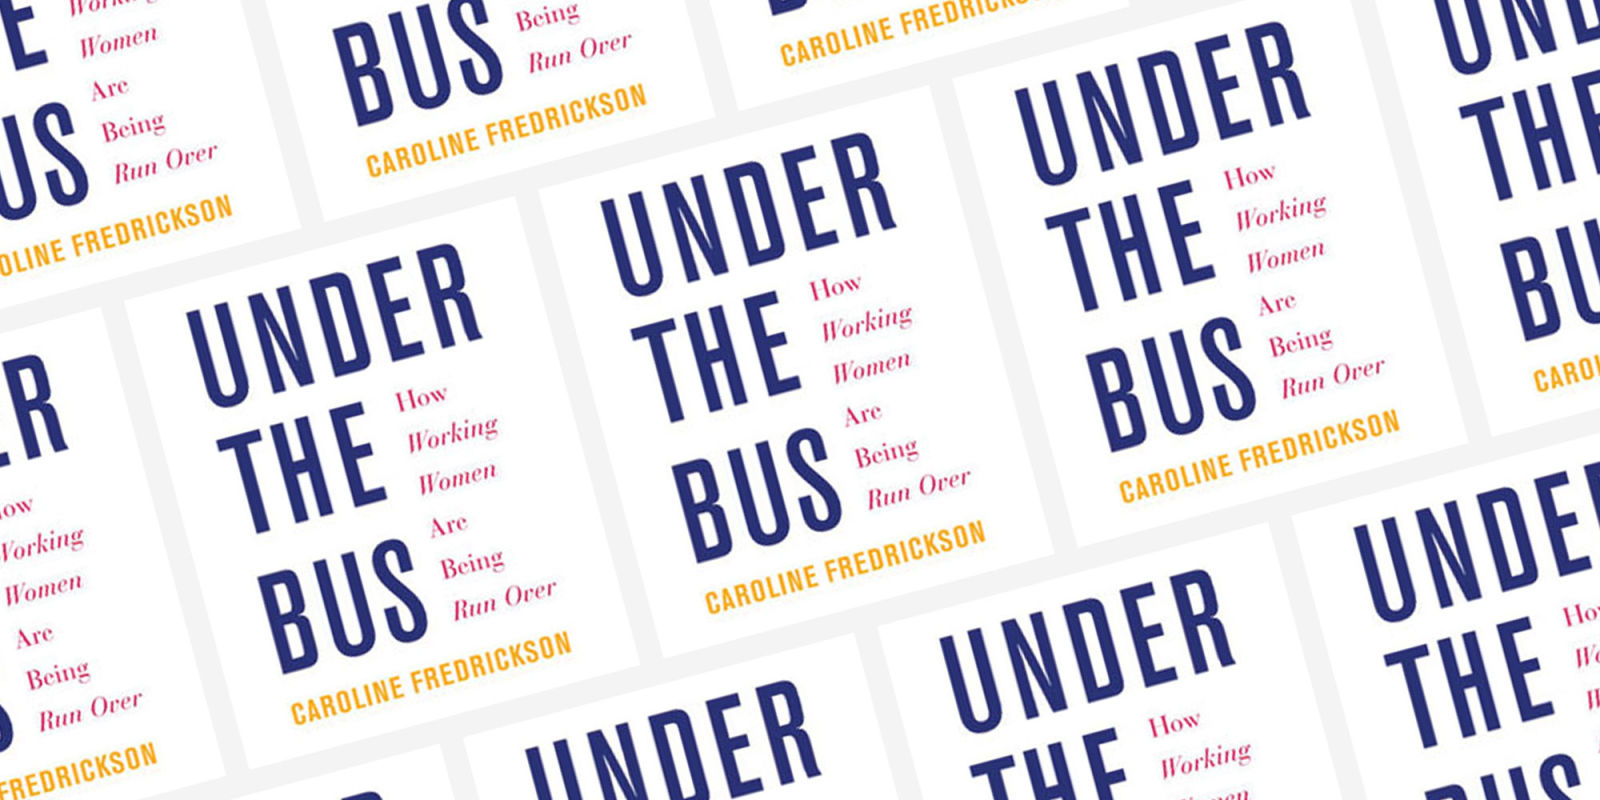 Under the Bus covers